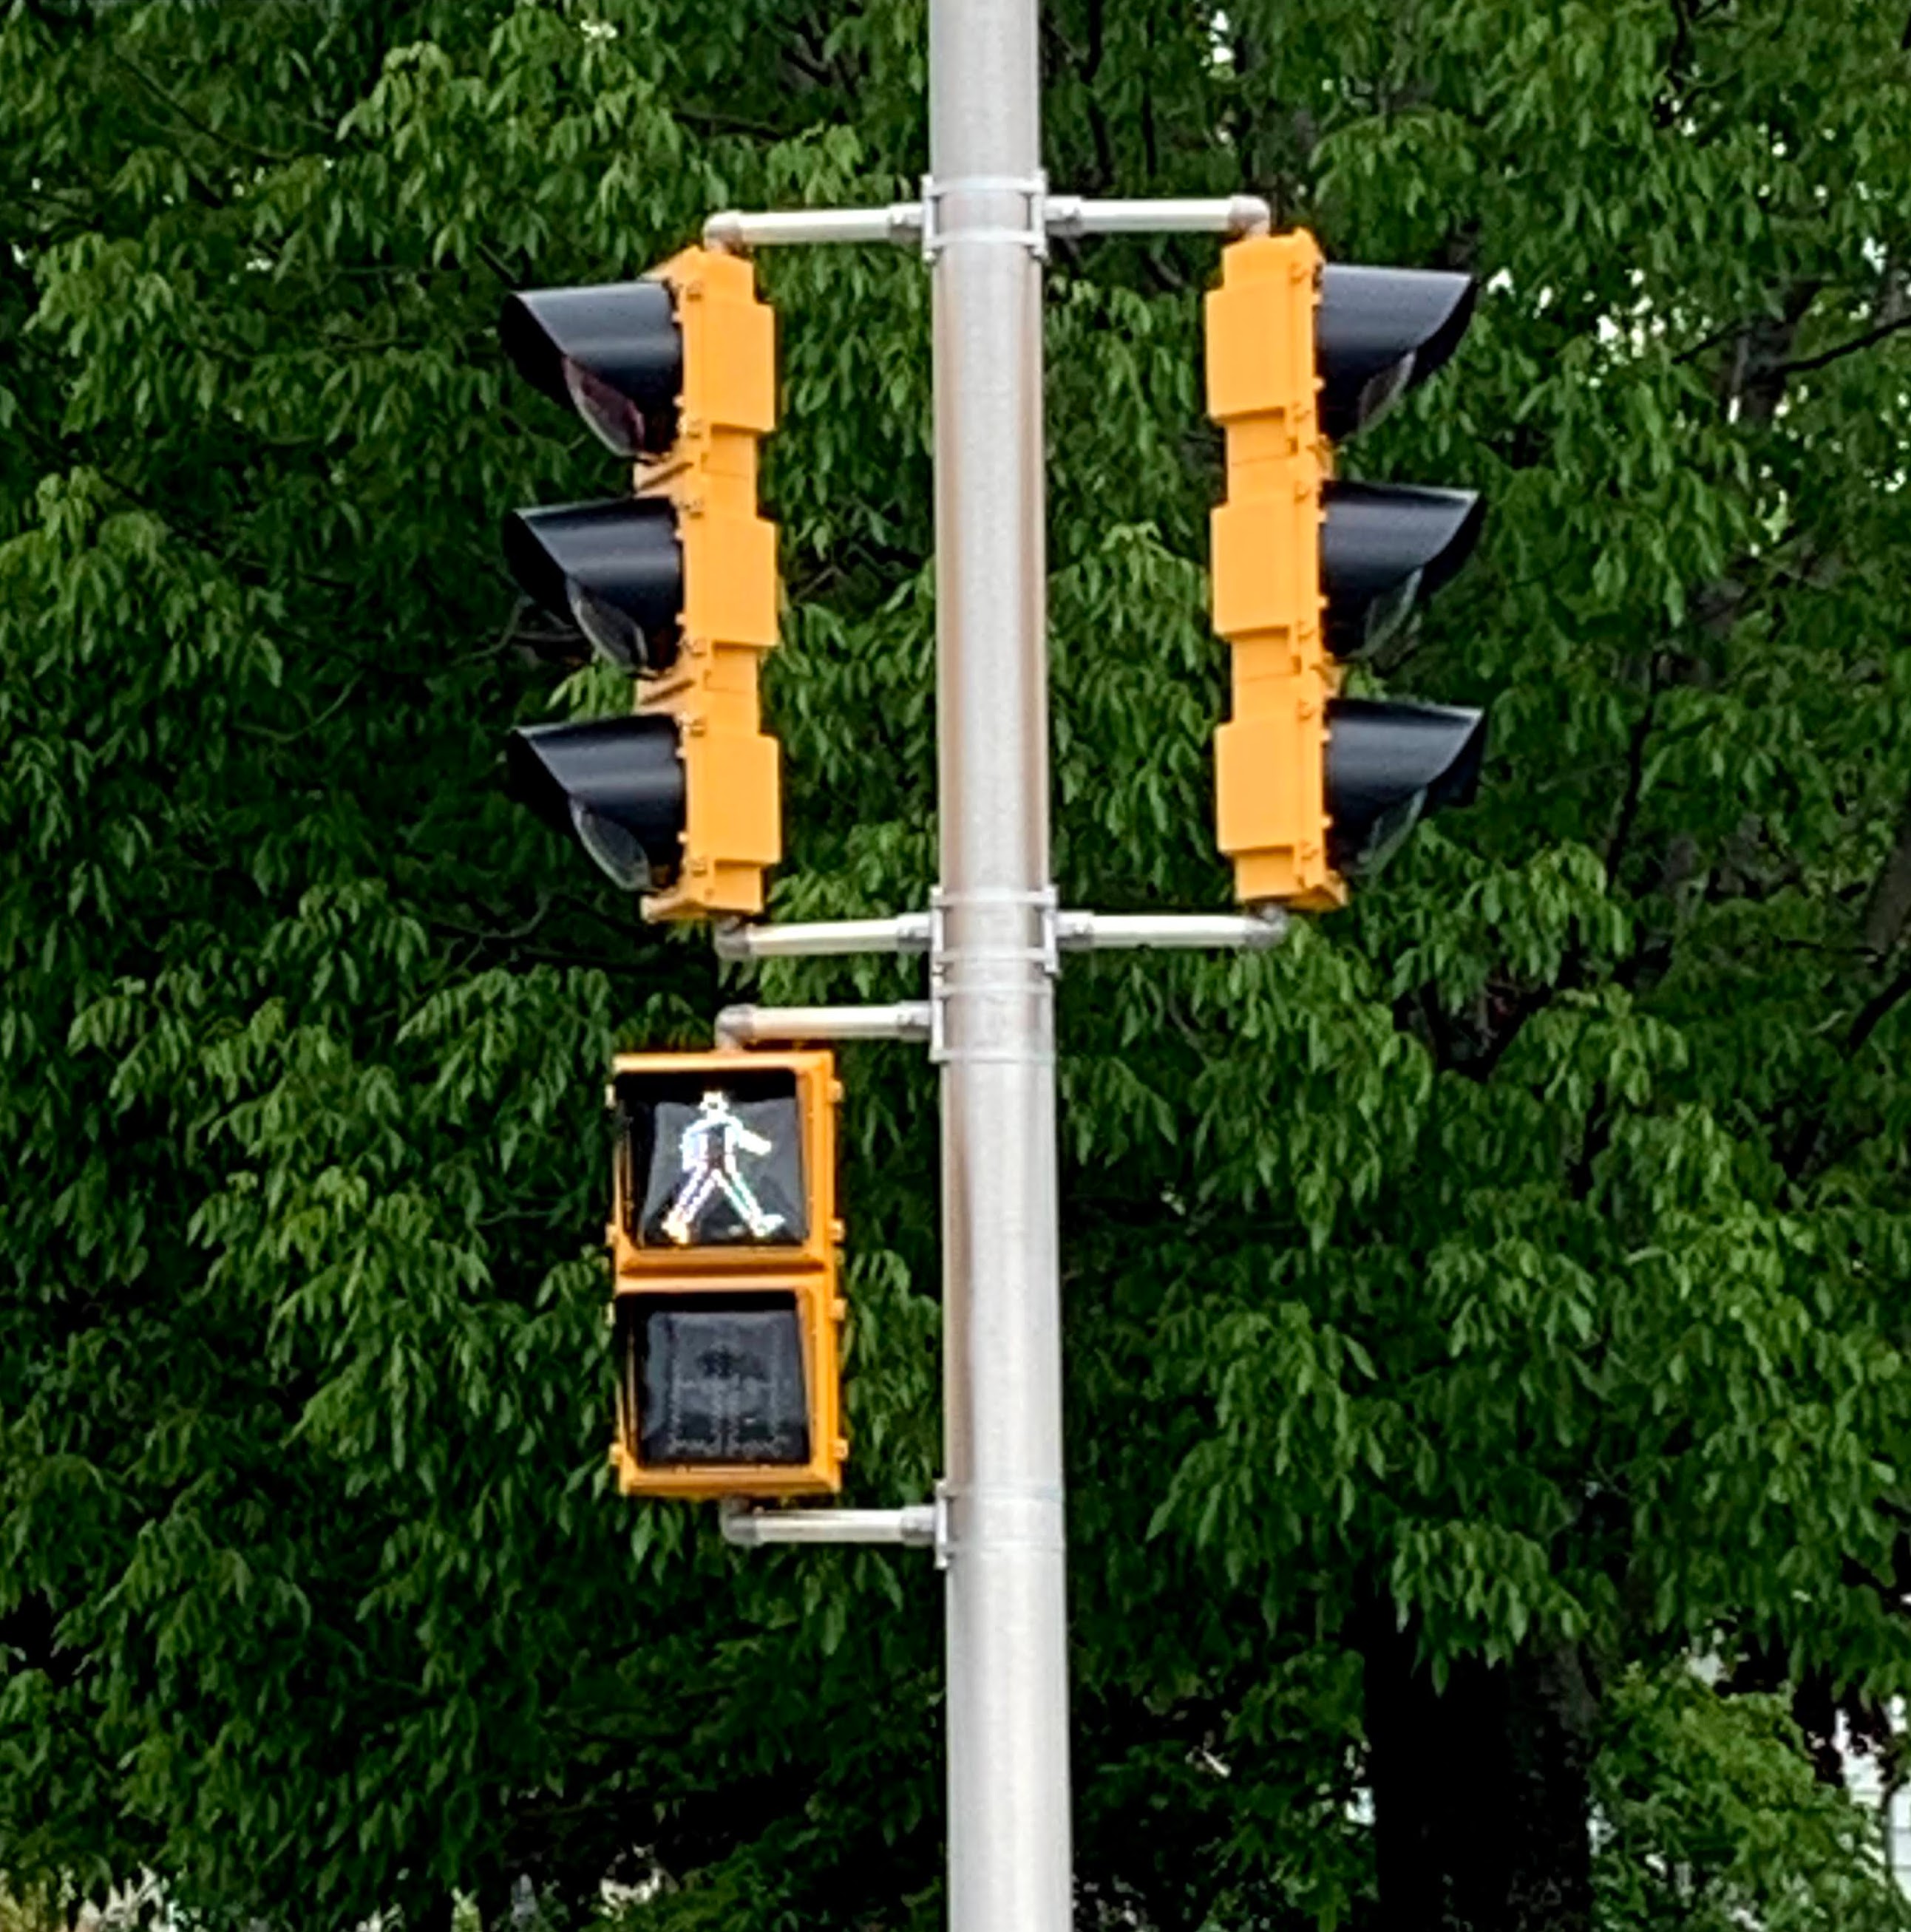 Photograph of Signalized Traffic Control